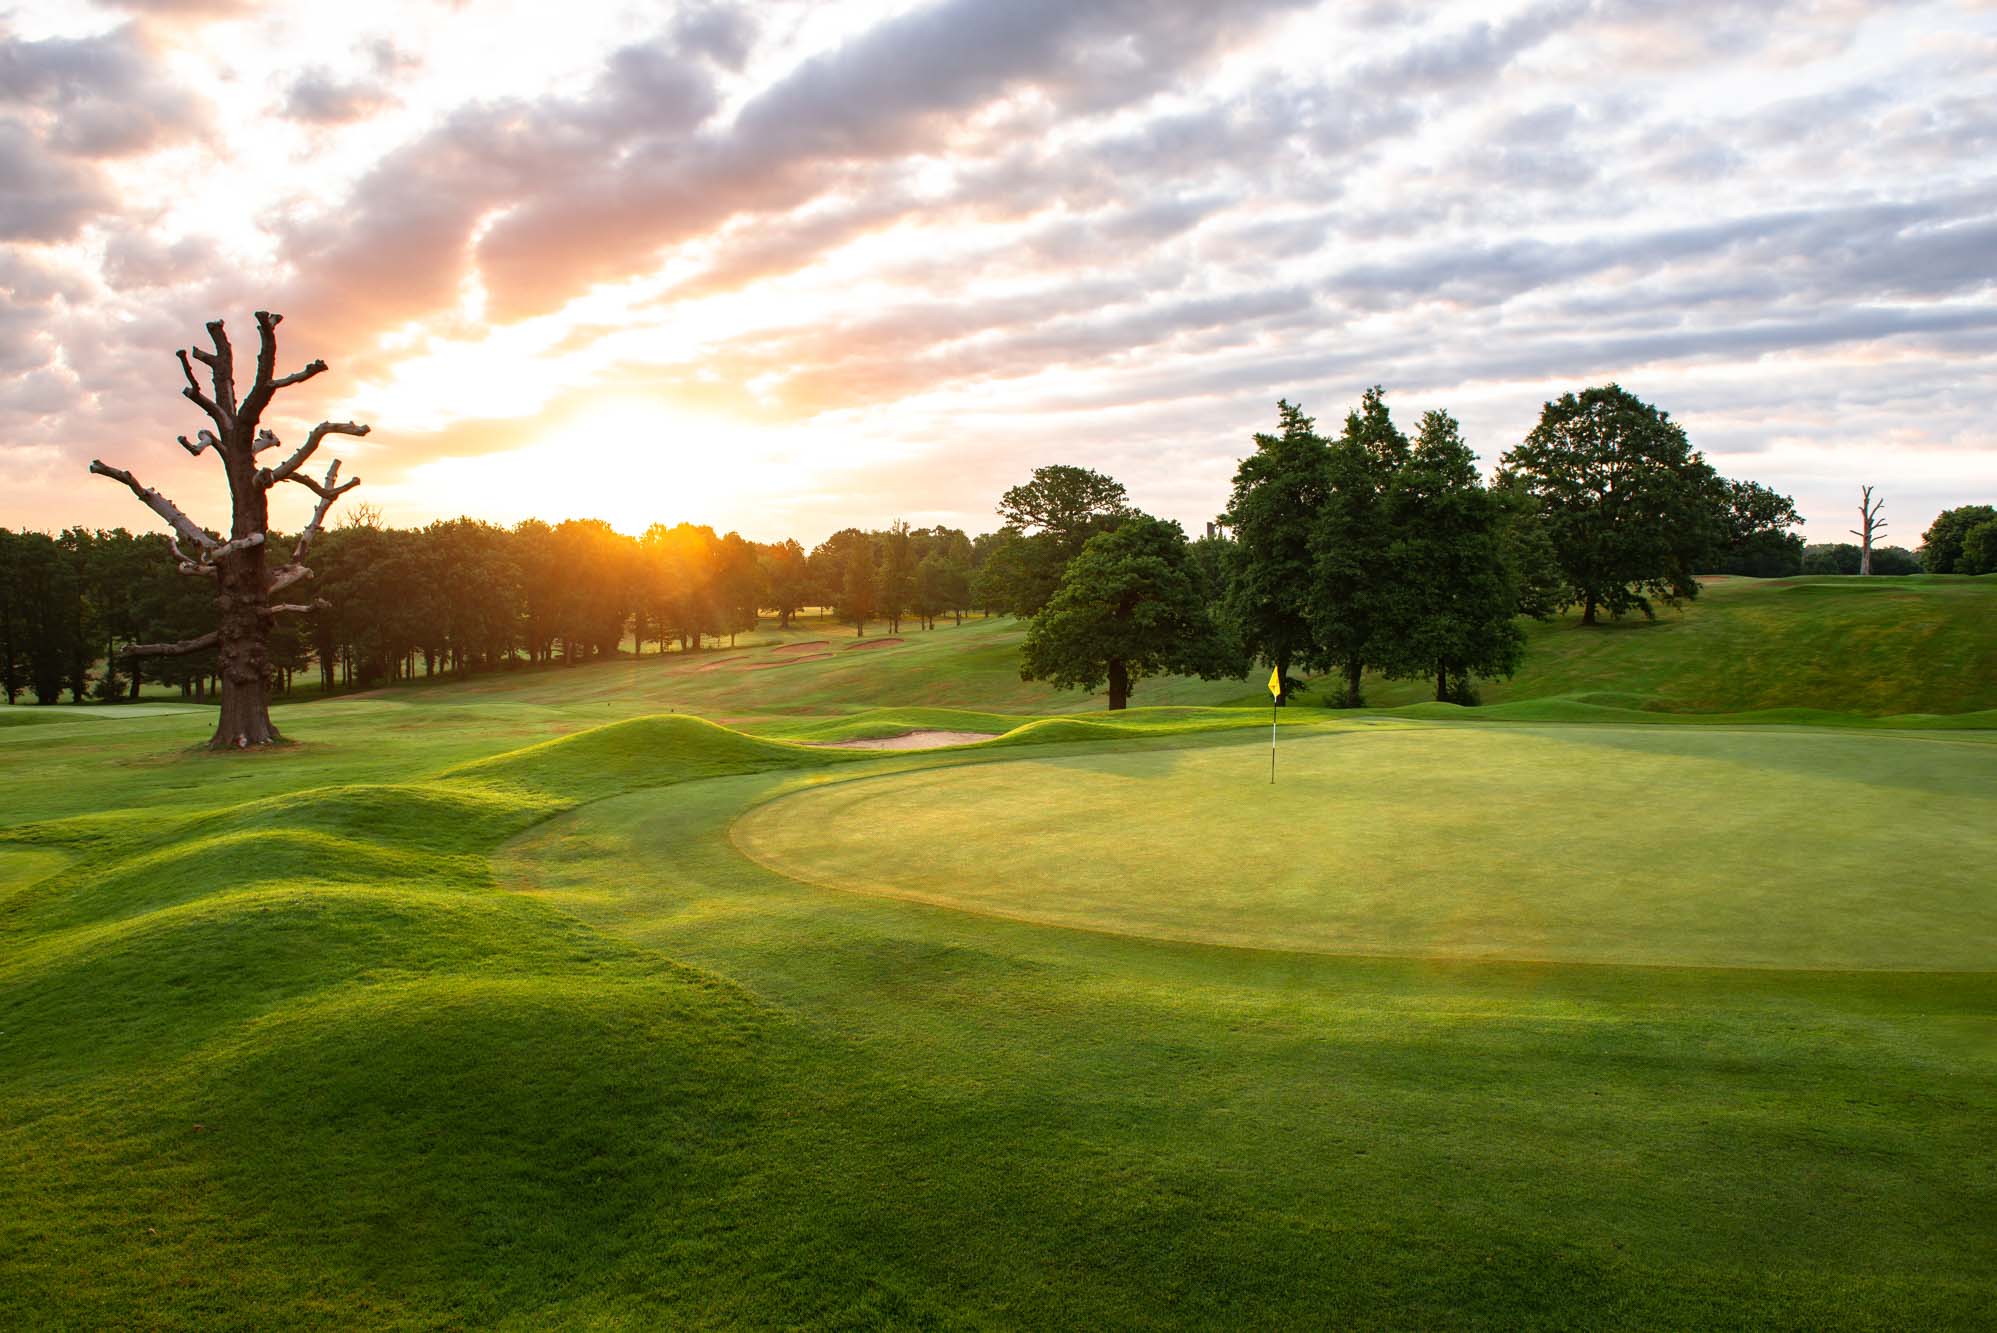 The green contours at Moor Park Golf Club.